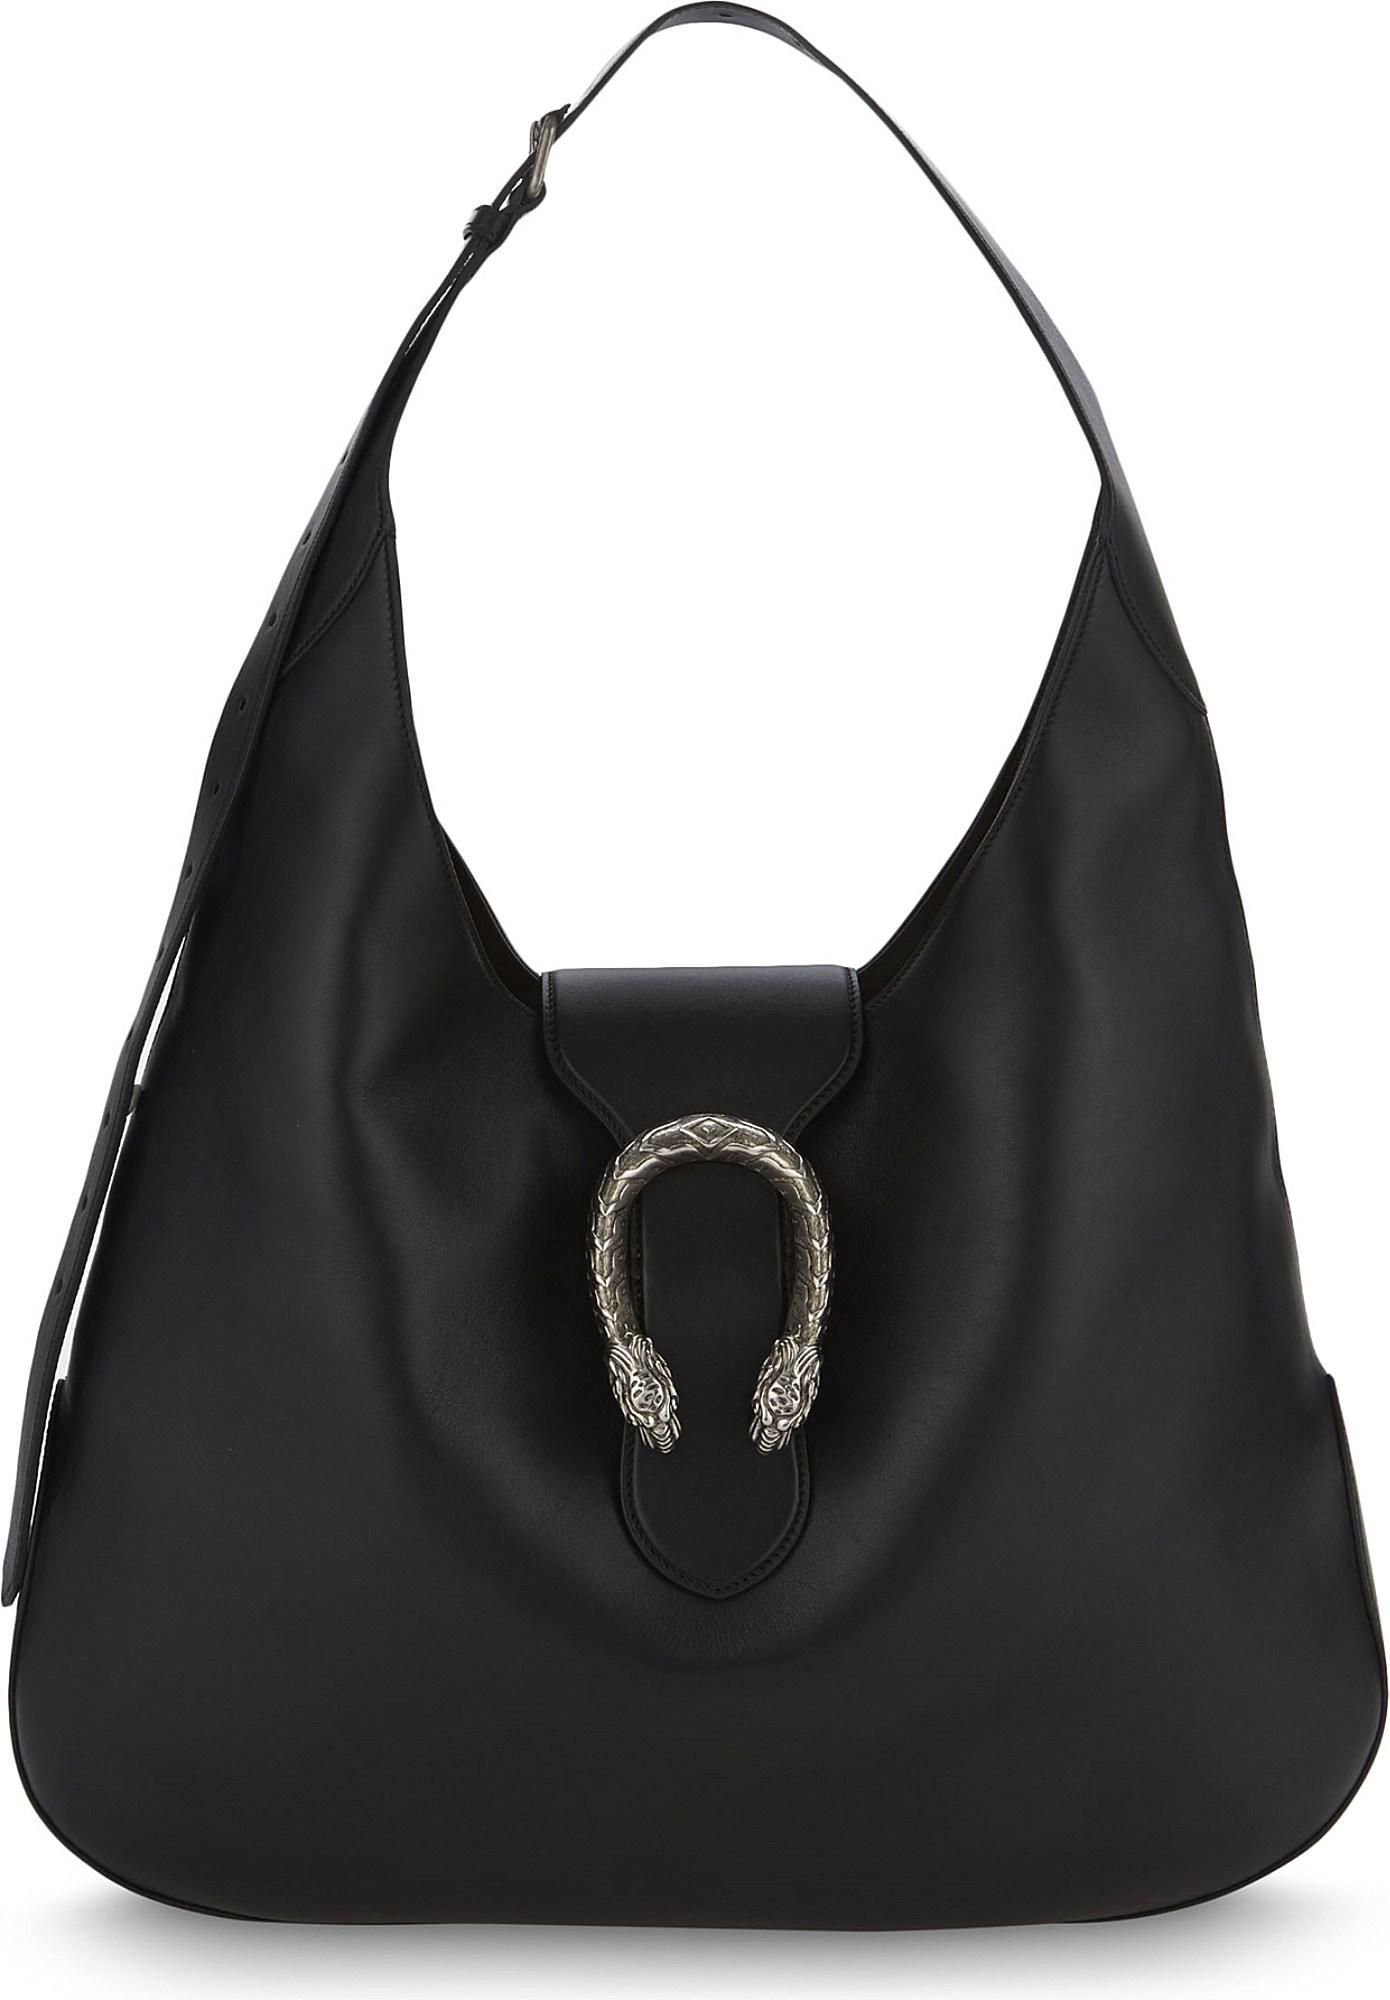 Lyst - Gucci Dionysus Extra Large Leather Hobo Bag in Black